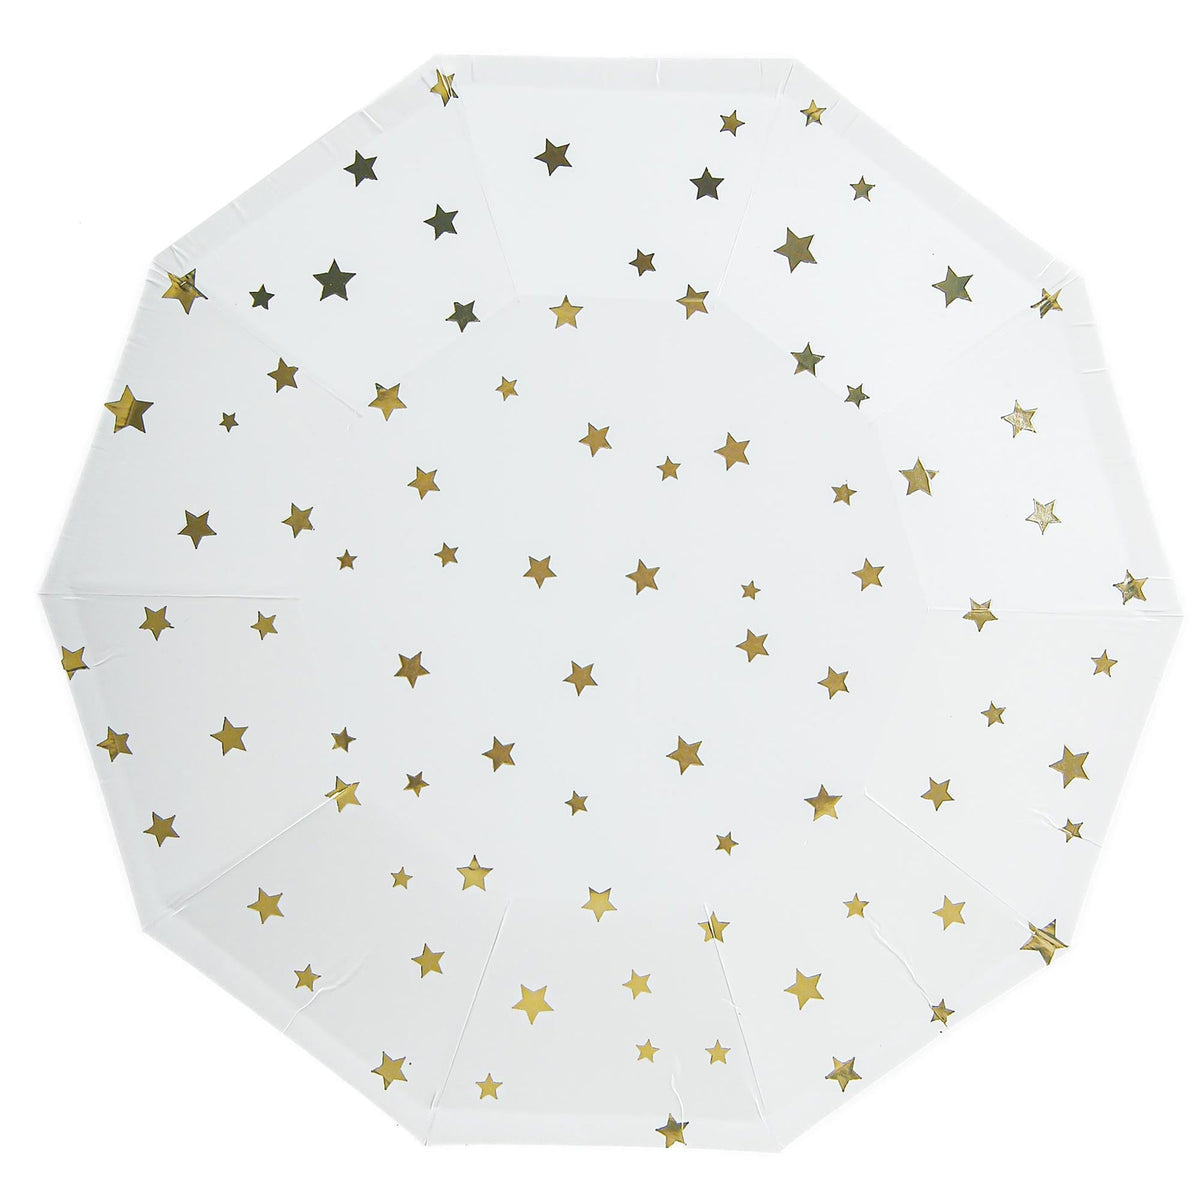 YIWU SANDY PAPER PRODUCTS CO., LTD Everyday Entertaining Little Stars Large Decagon Lunch Paper Plates, Gold, 9 Inches, 8 Count 810120713137